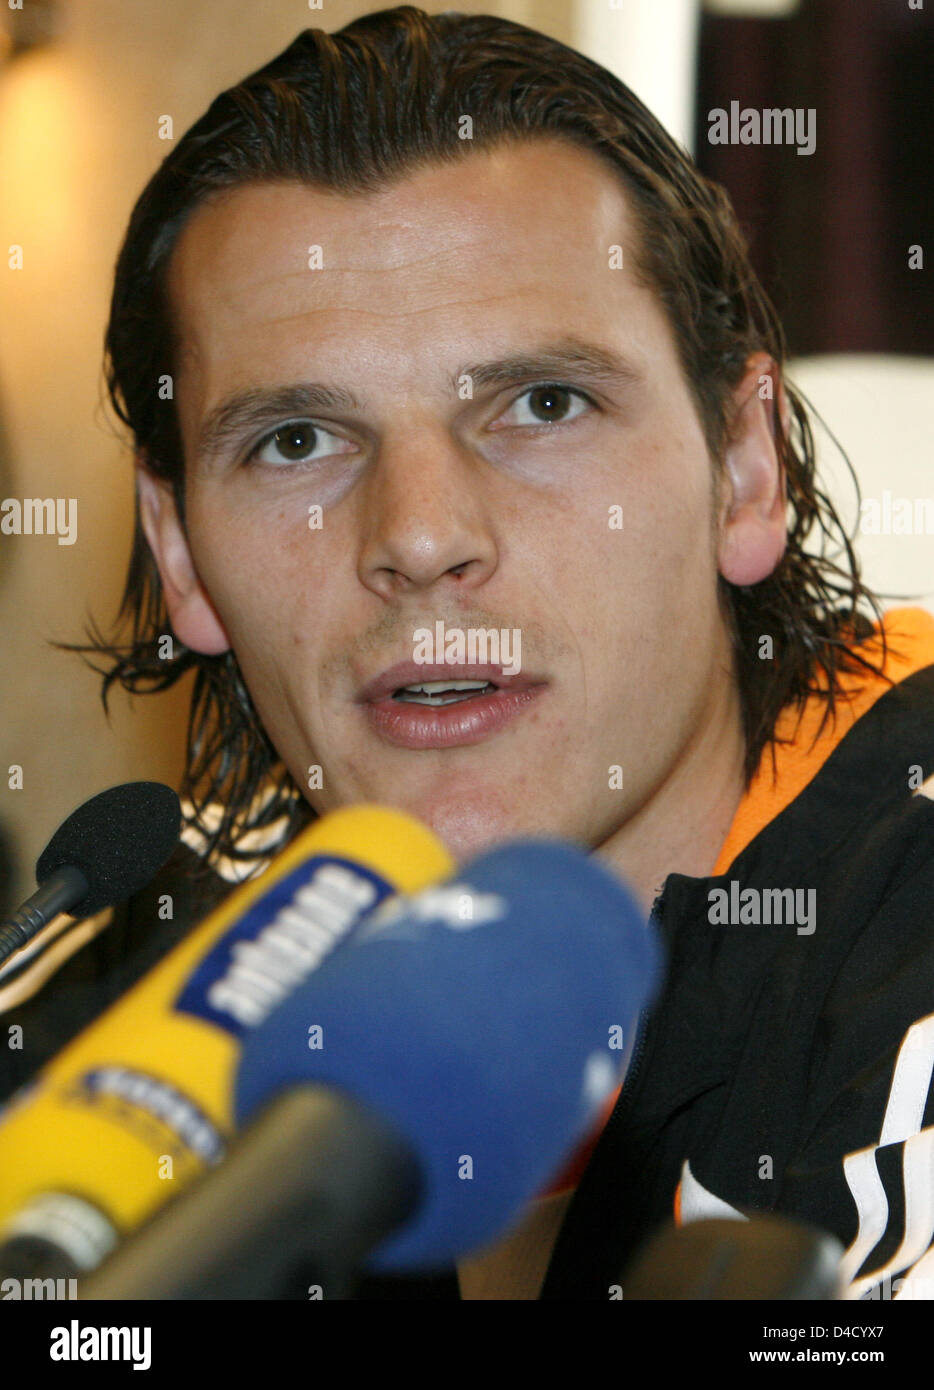 Daniel van Buyten (L) of German Bundesliga soccer club Bayern Munich is pictured during a press conference in Brussels, Belgium, 05 Mrach 2008. Bayern Munich wil play against RSC Anderlecht in a round of the last 16 match in Anderlecht on 6 March 2008. Photo: FRANZ-PETER TSCHAUNER Stock Photo